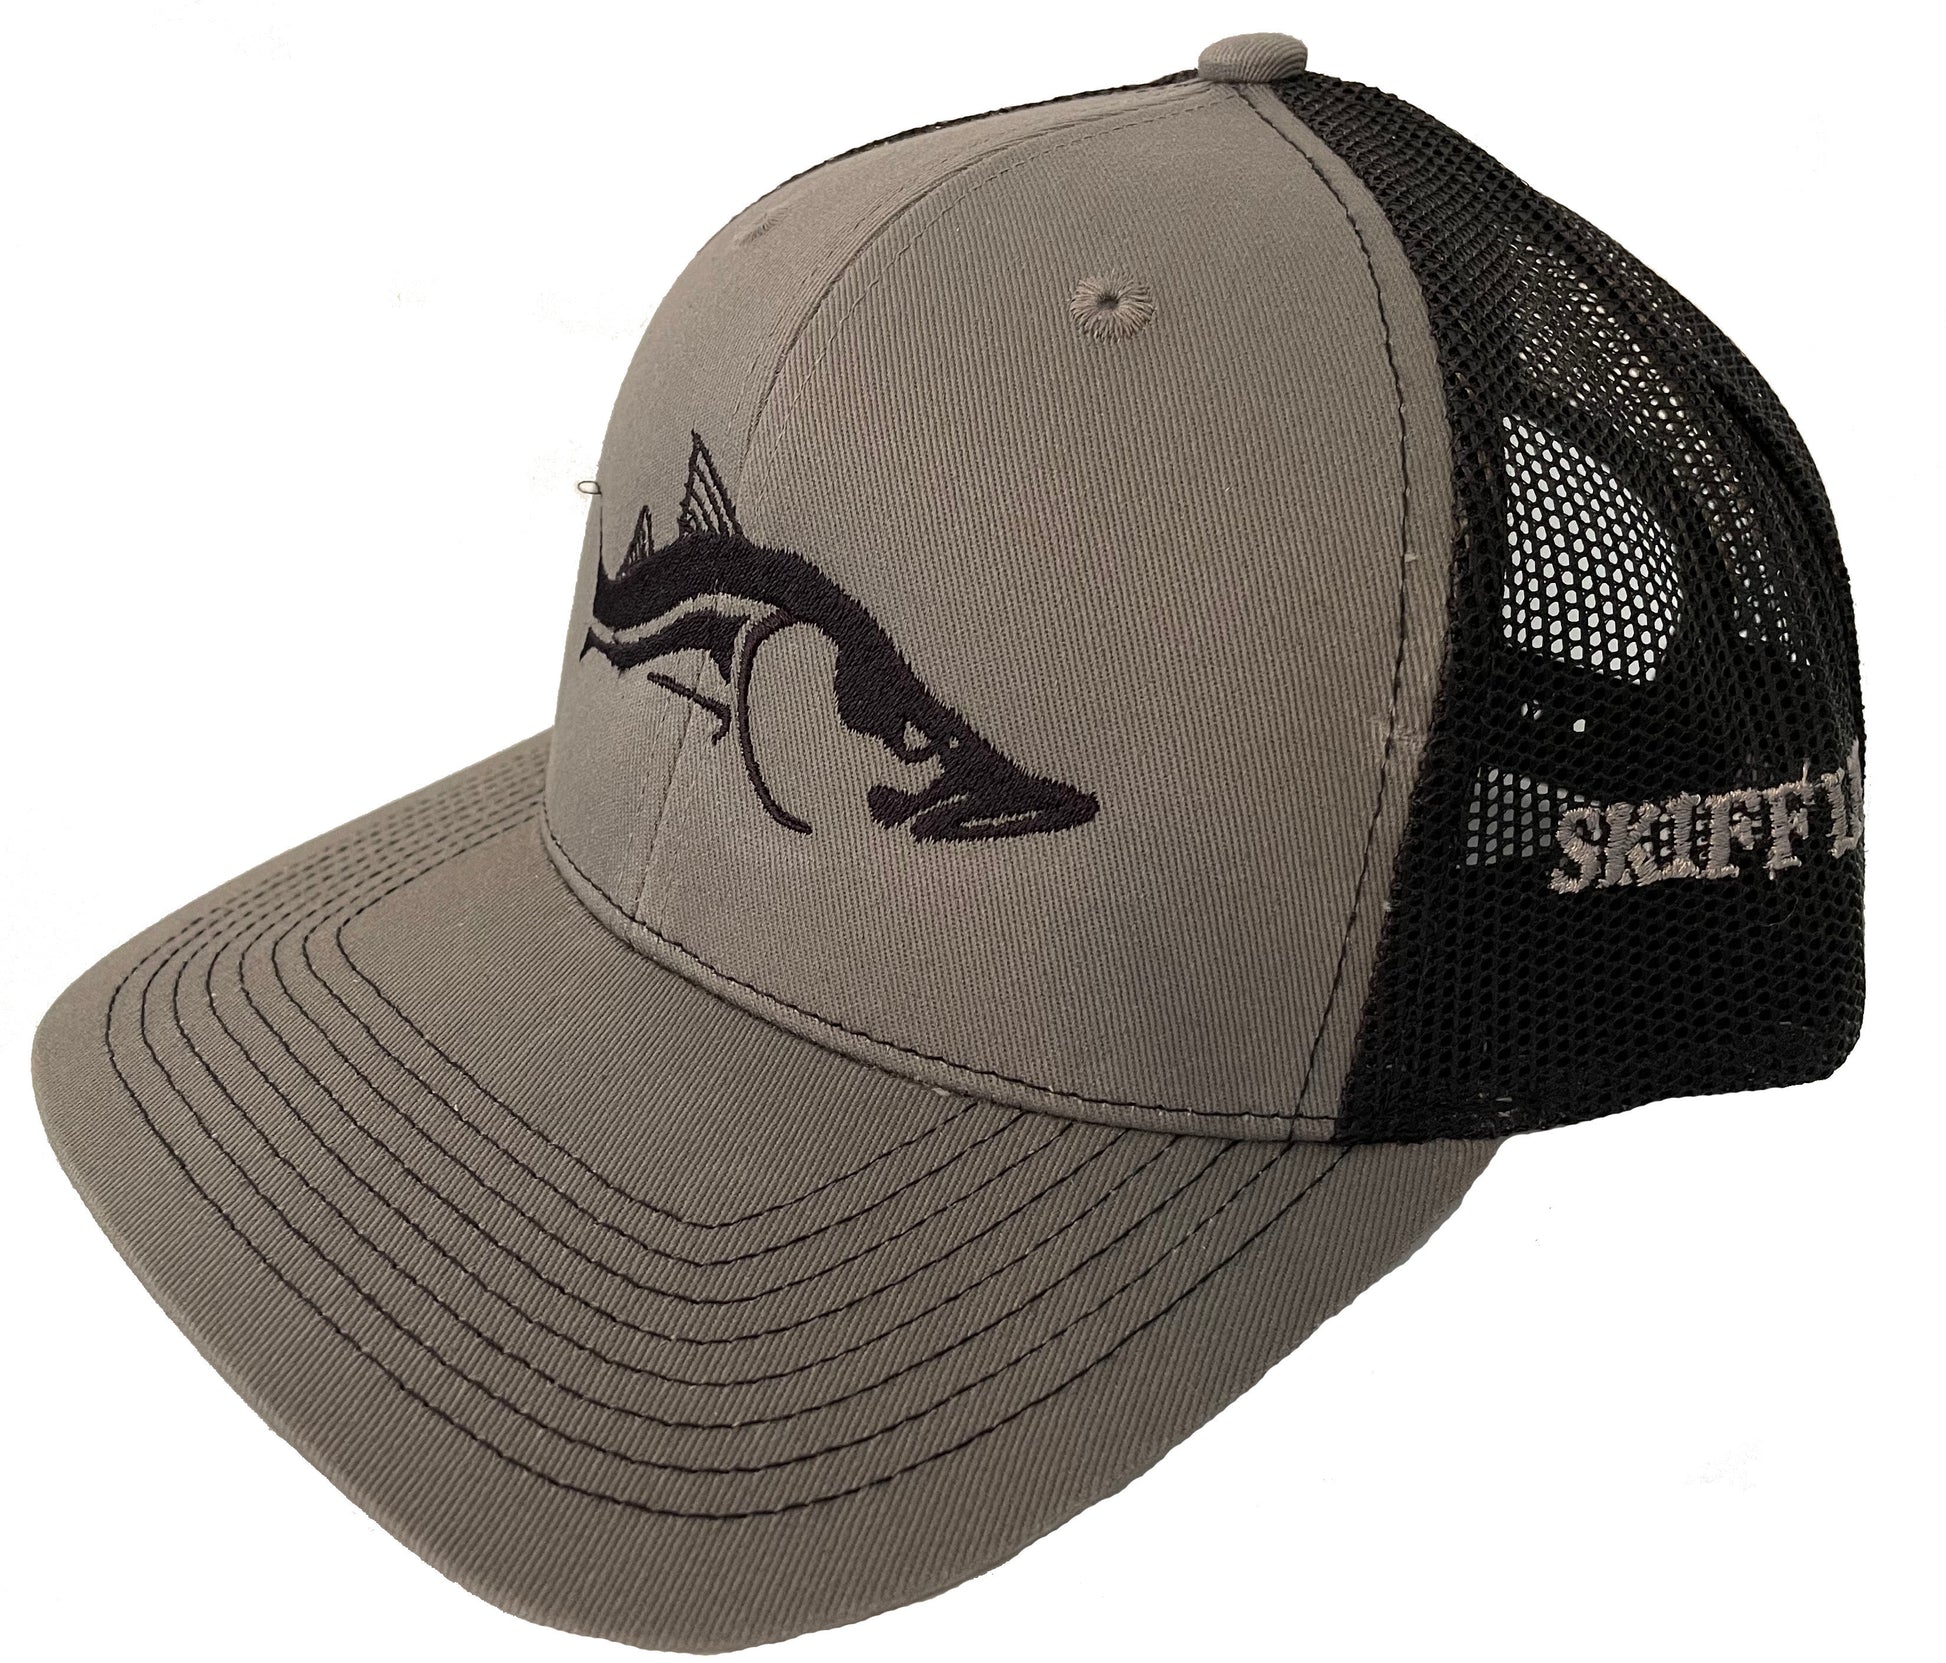 Snook Charcoal Gray Black Meshback Trucker Hats by Skiff Life